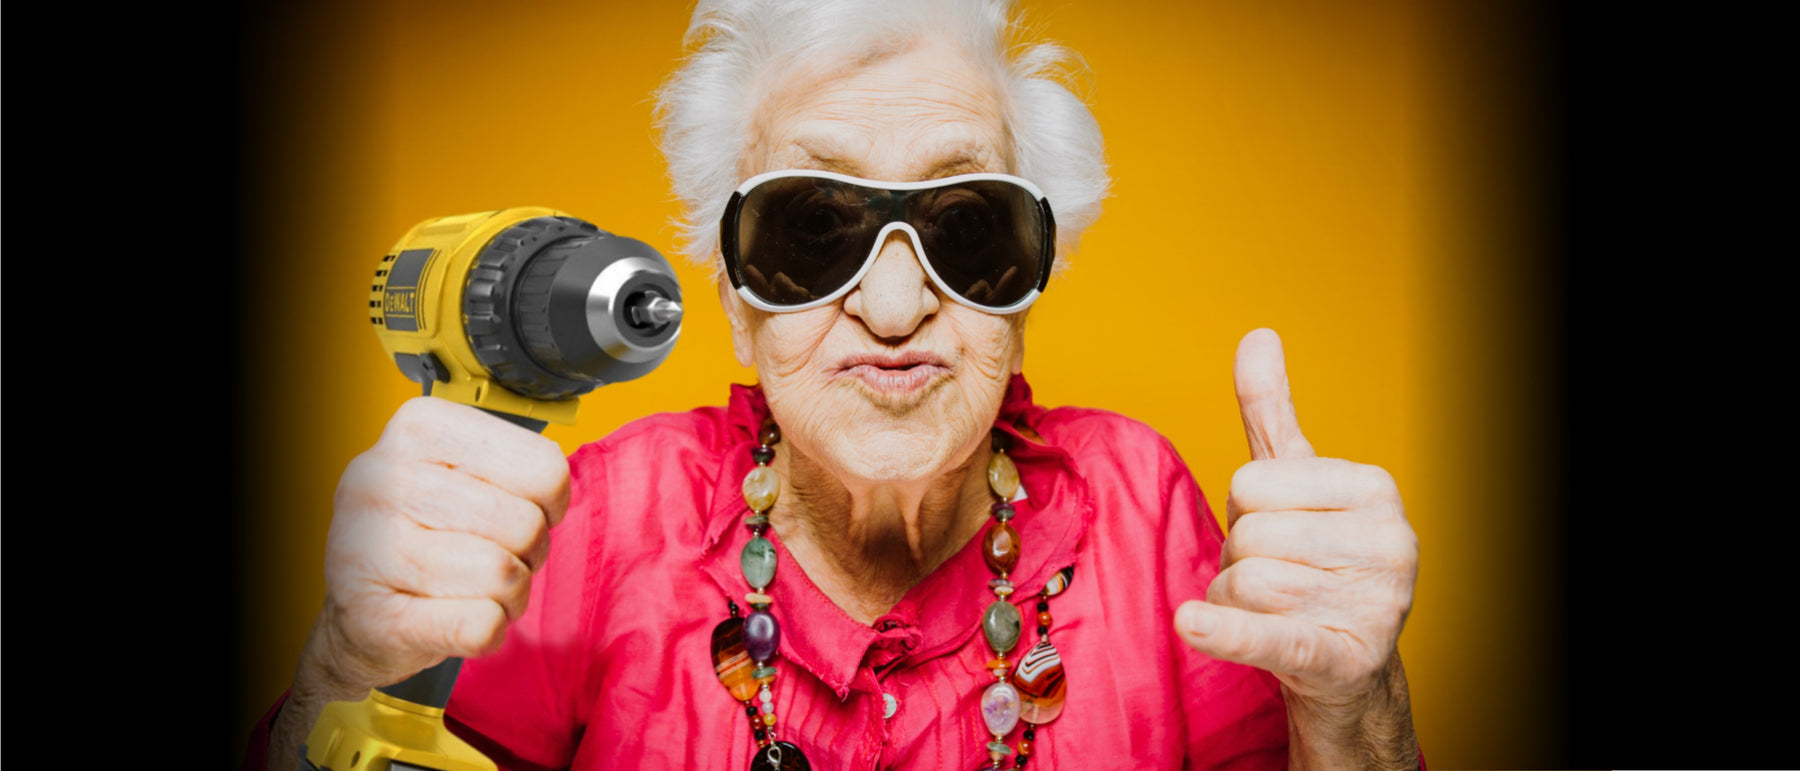 Elderly woman holding a power drill and wearing sunglasses